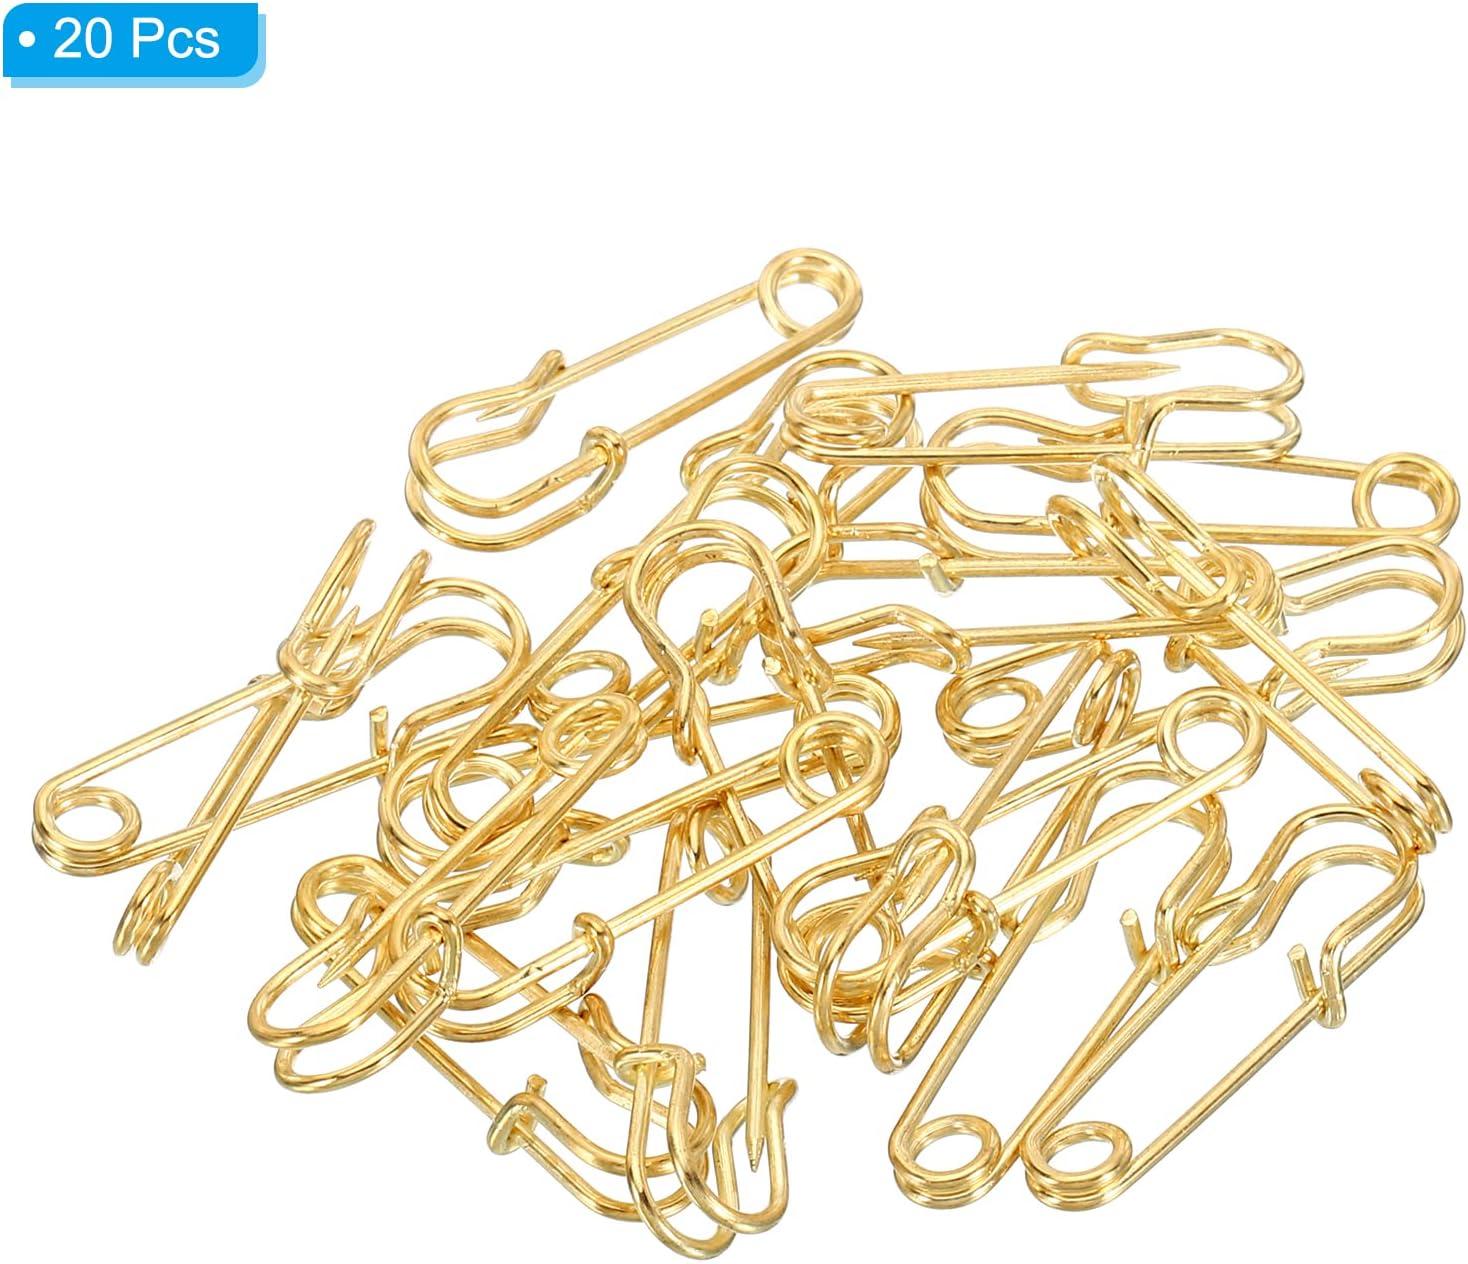  MECCANIXITY Safety Pins 1.5 Inch Metal Nickel Plated